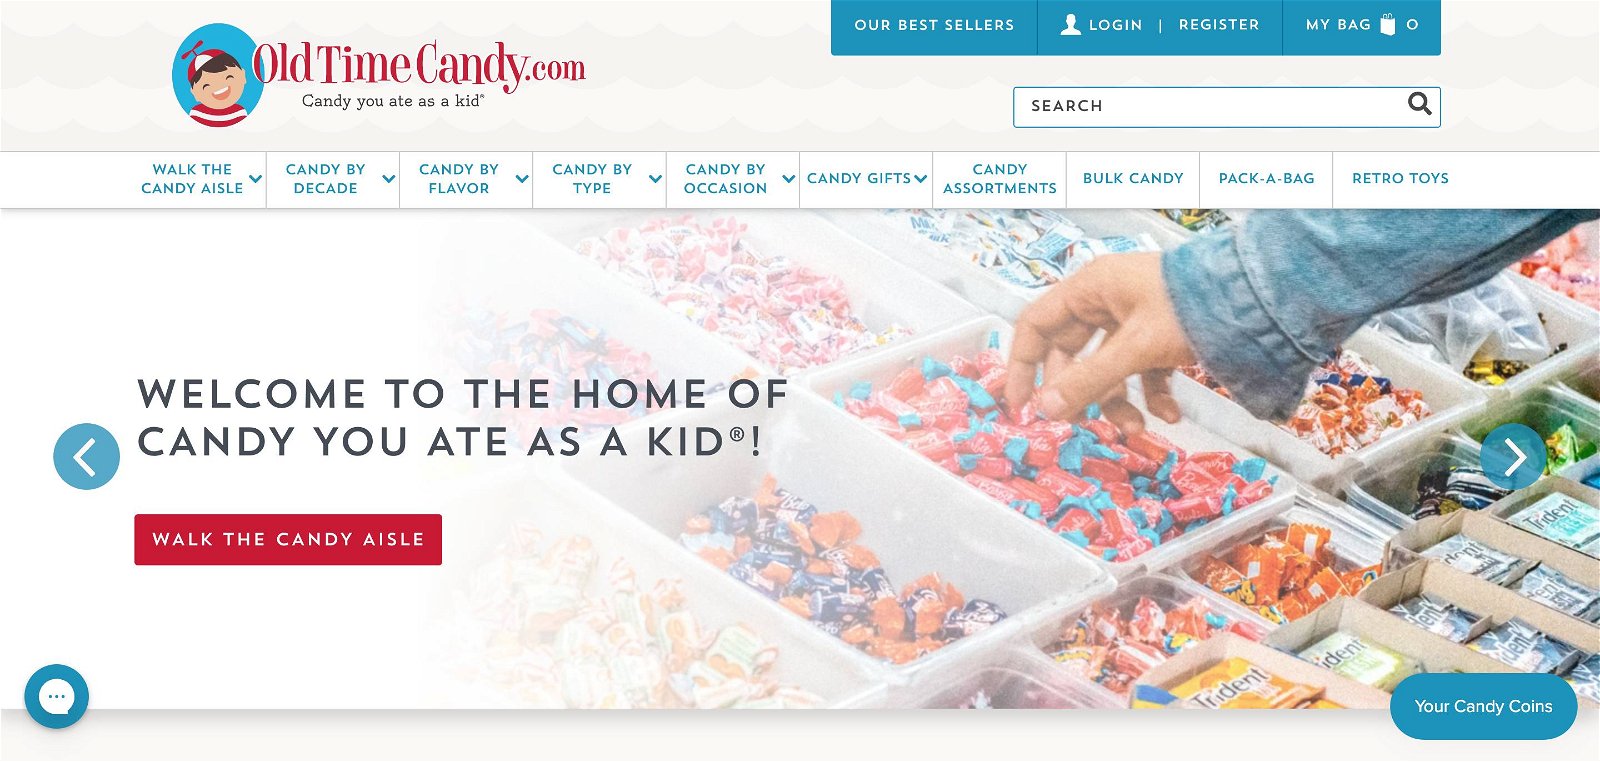 Old time candy.com